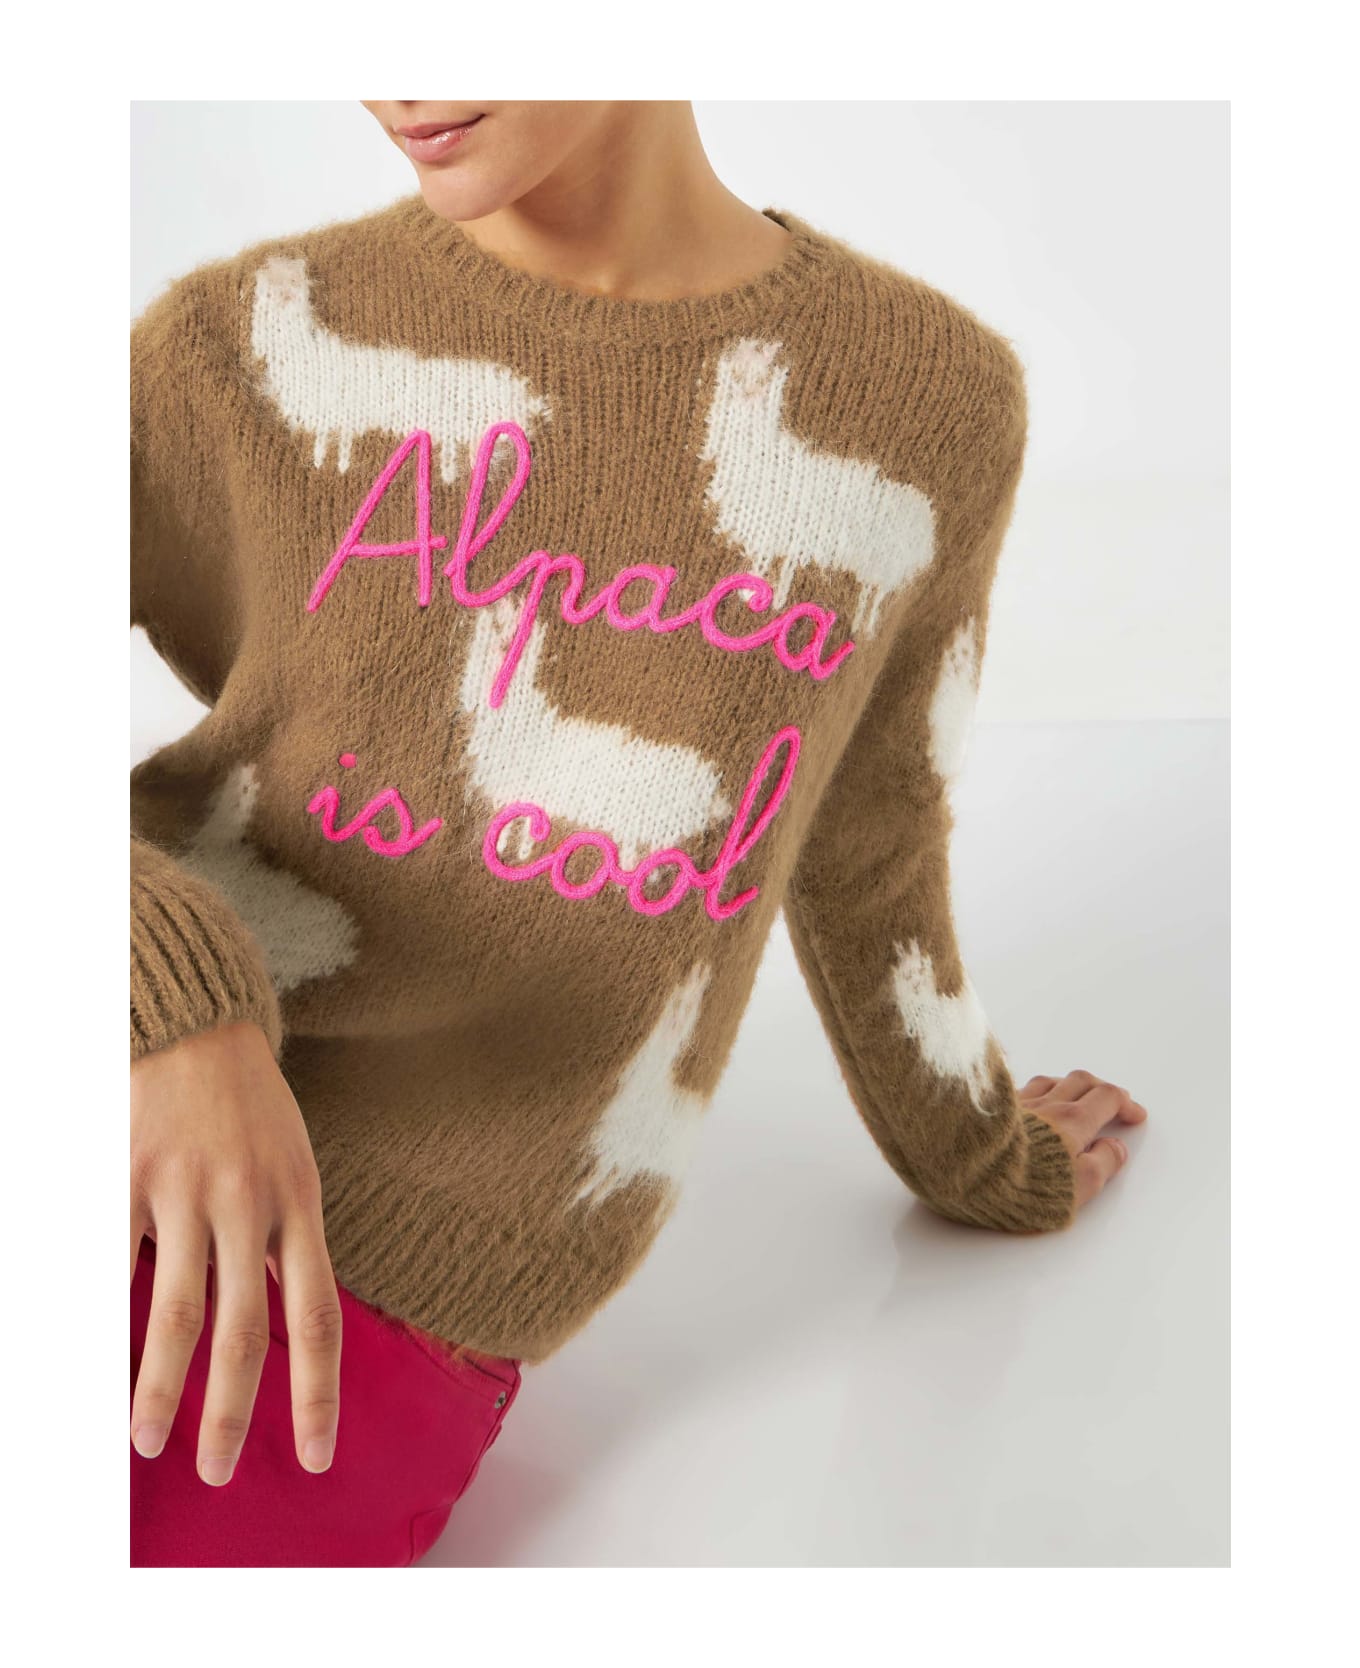 MC2 Saint Barth Woman Brushed Sweater With Alpaca And Alpaca Is Cool Embroidery